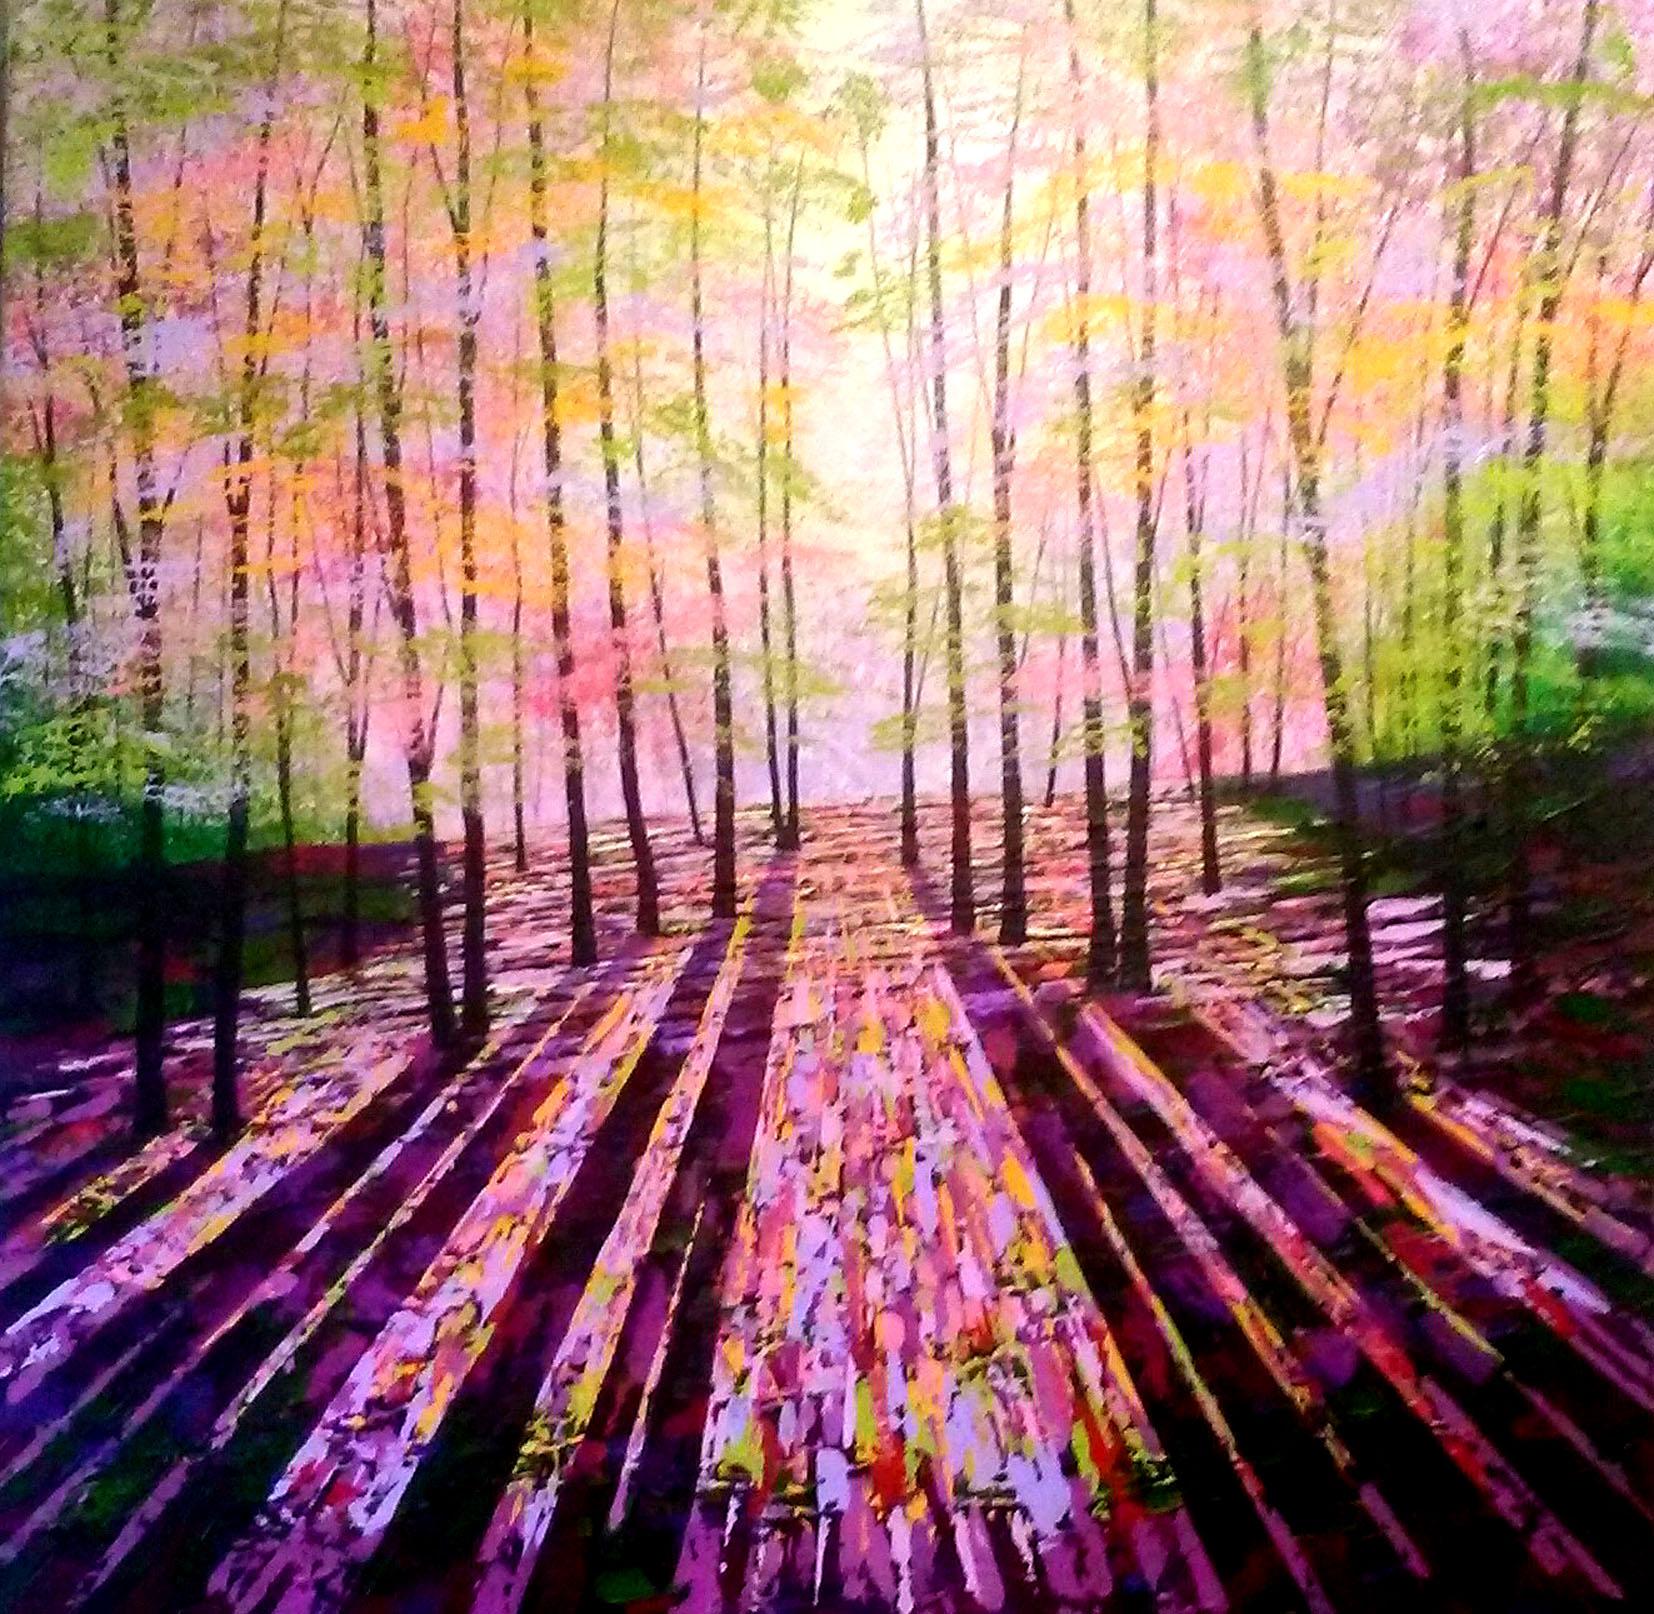 Amanda Horvath
The Harmony of Trees
Original Acrylic Painting on Canvas
Acrylics on canvas
Image size: H 76cm x W 76cm x D 3.5cms
Sold Unframed
Please note that in situ images are purely an indication of how a piece may look.

The Harmony of Trees